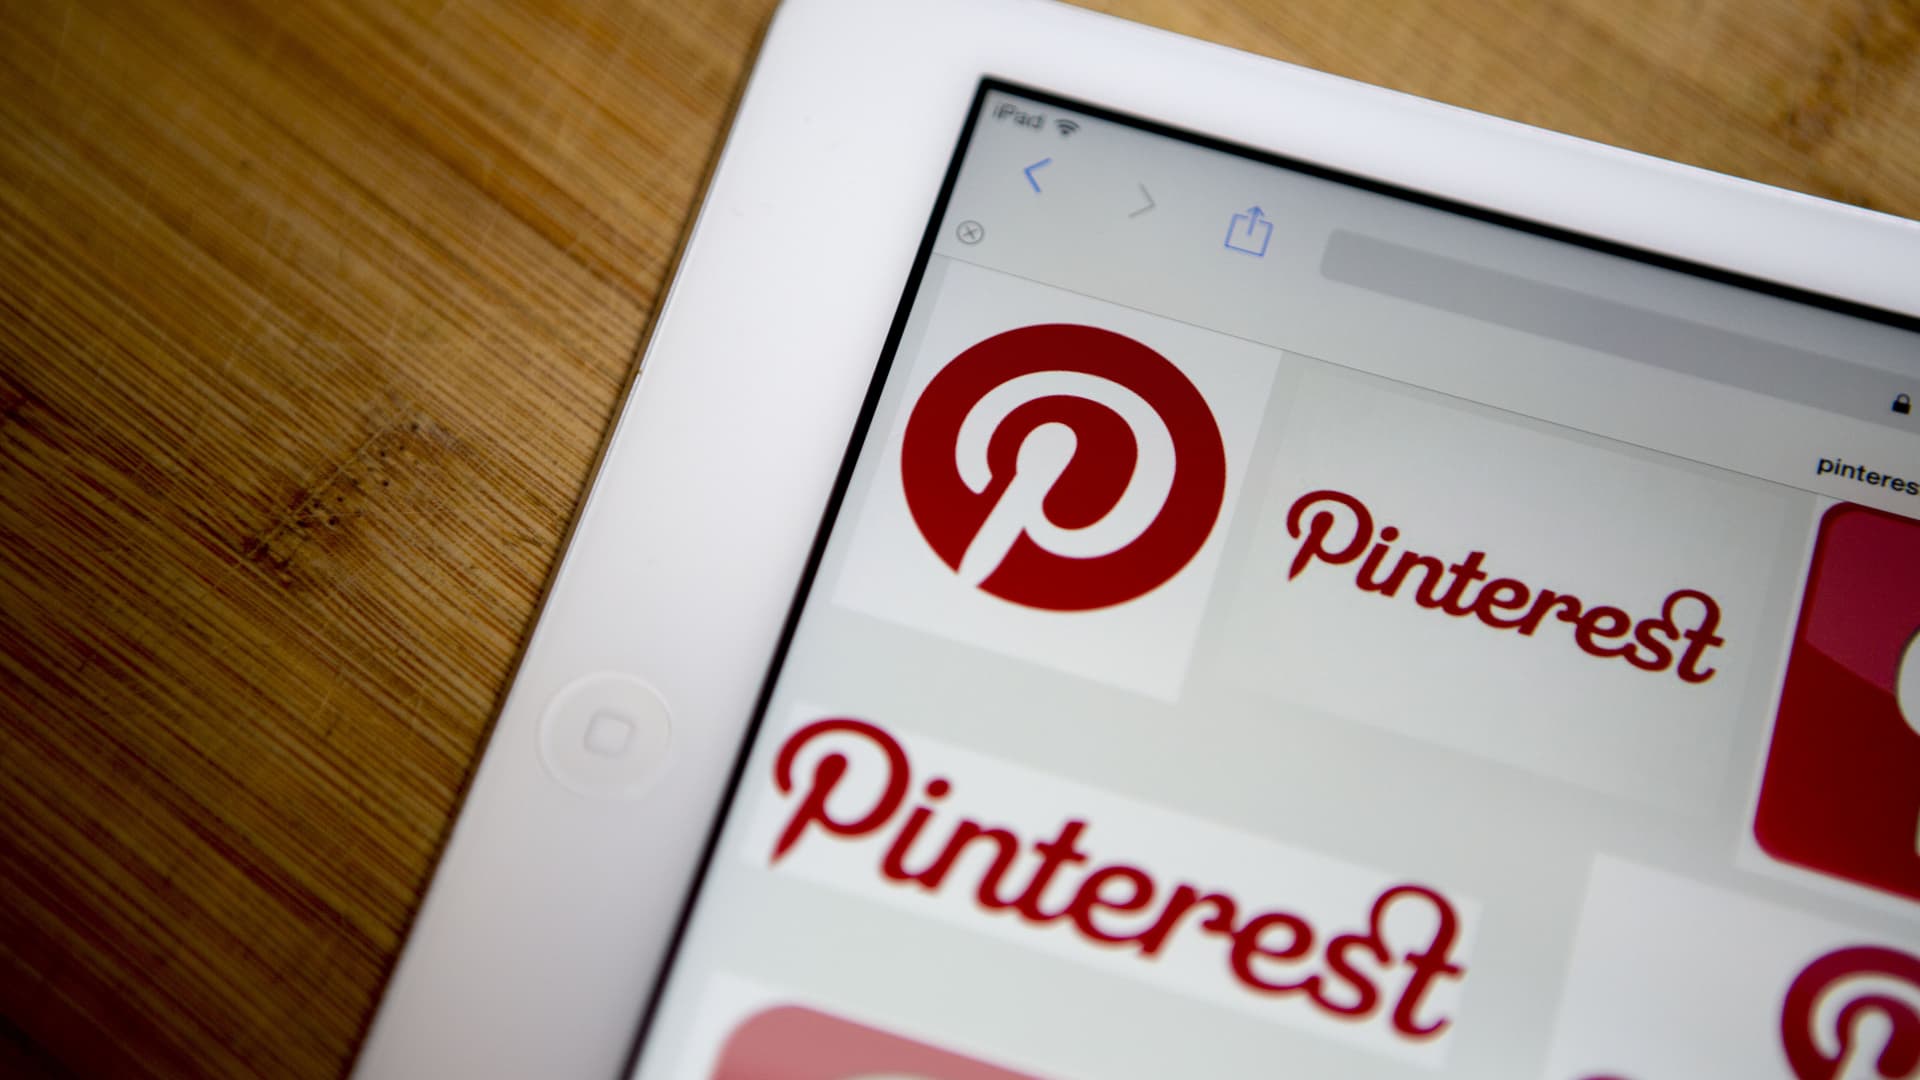 Pinterest shares jump after Elliott confirms it’s the company’s largest investor